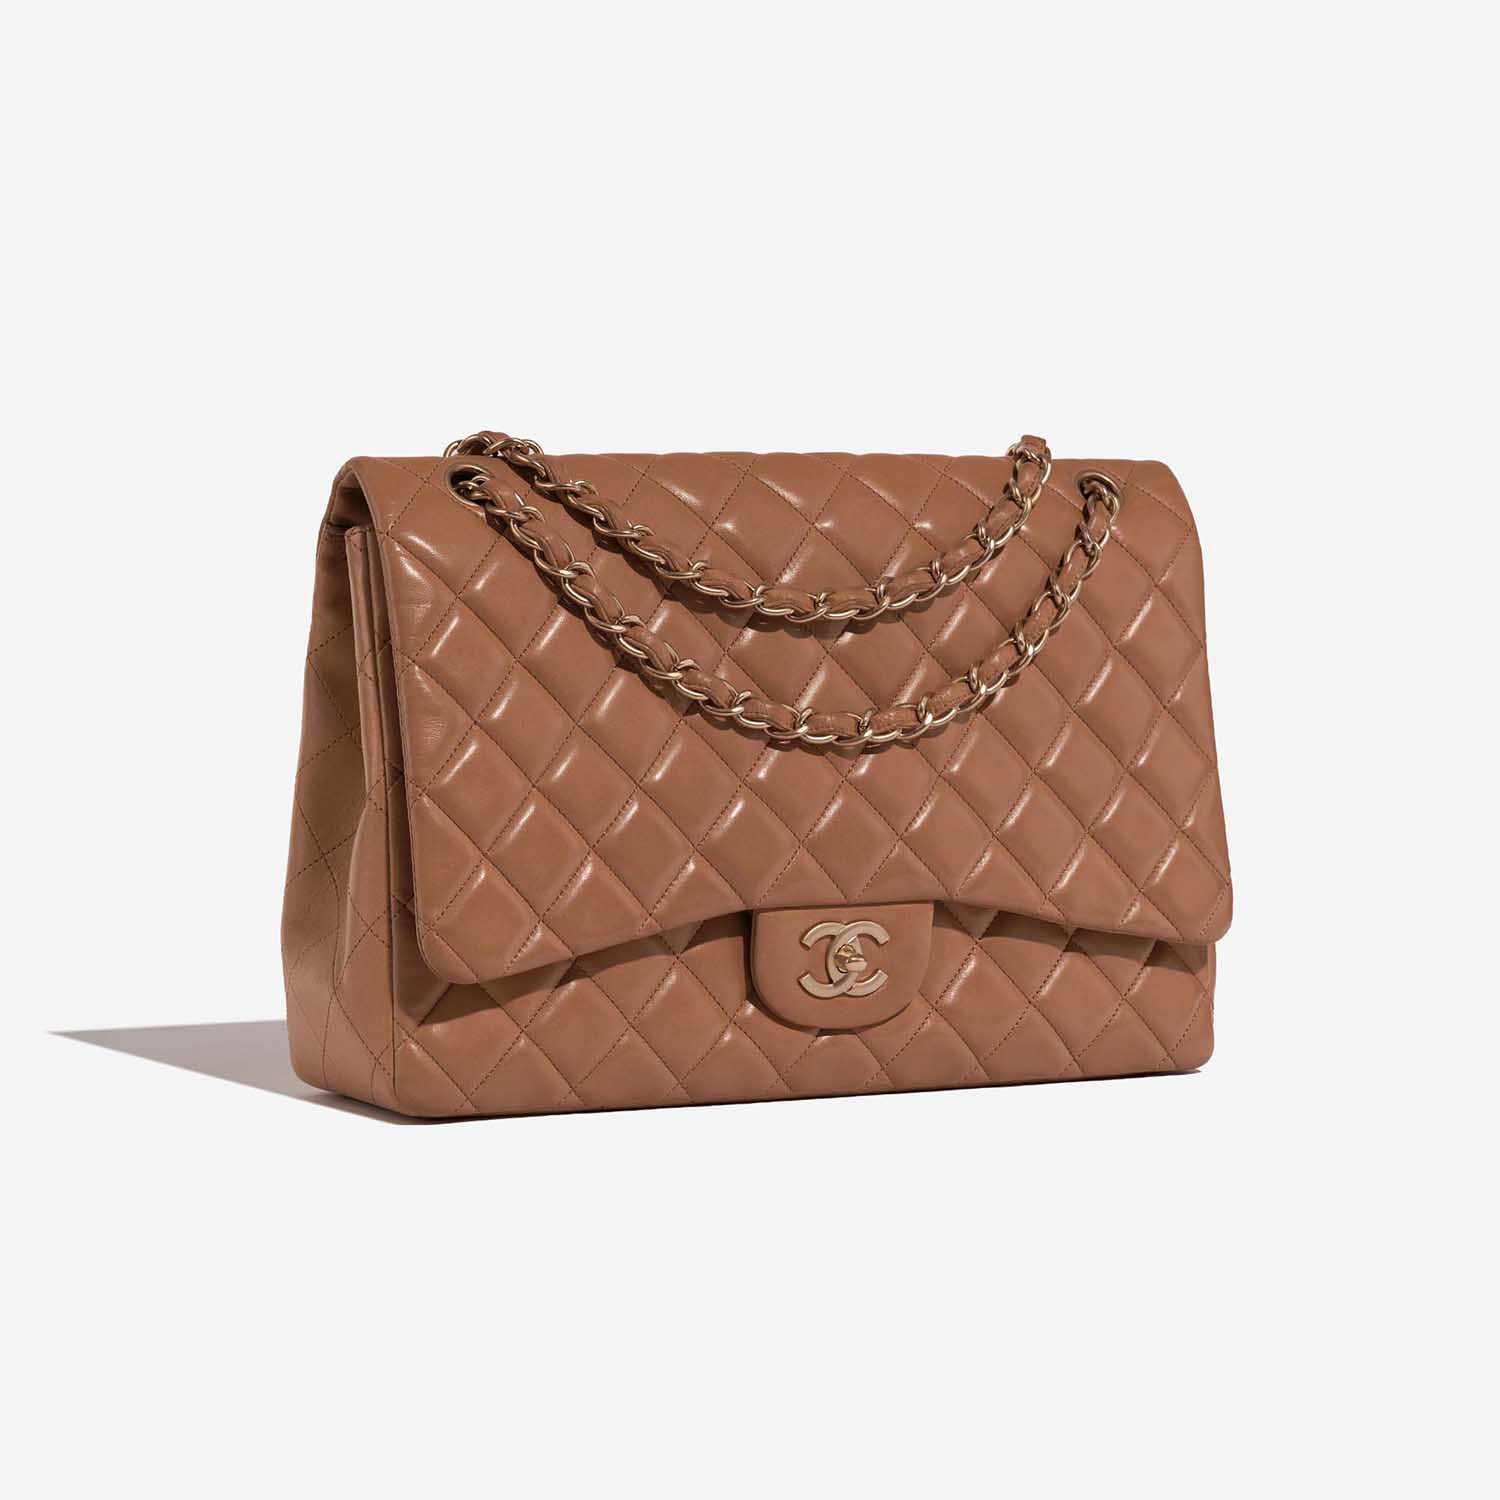 Chanel Timeless Maxi Cognac Side Front  | Sell your designer bag on Saclab.com